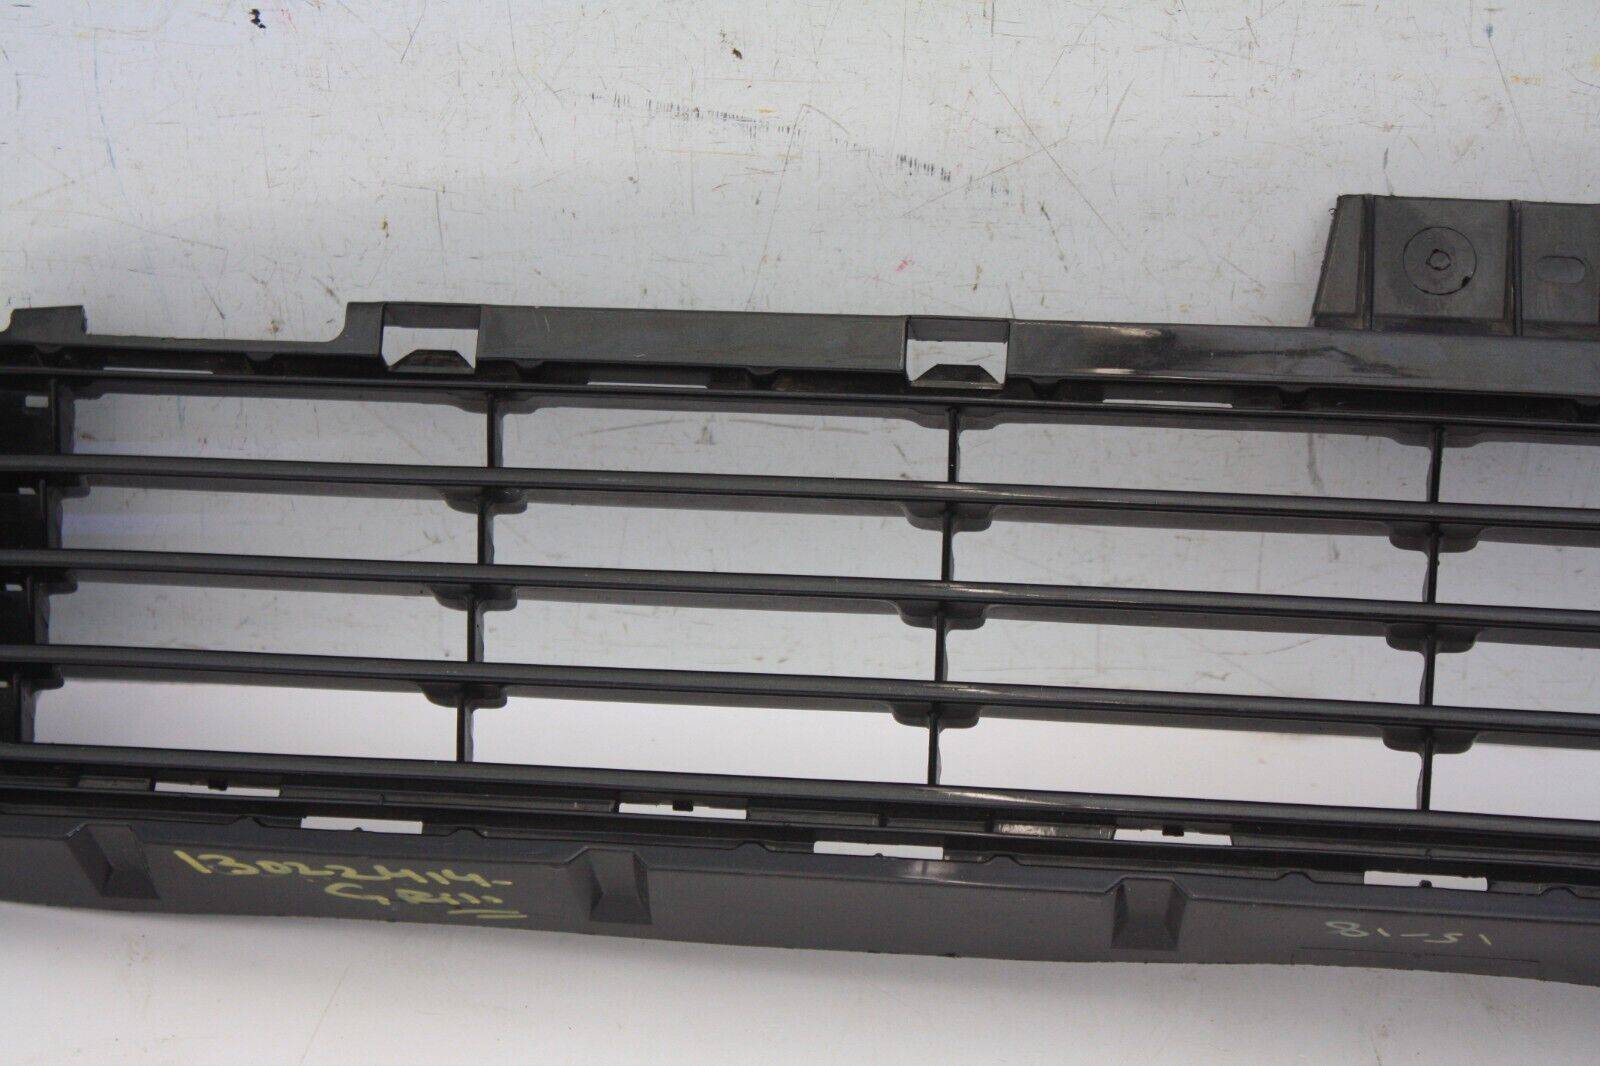 Toyota-Auris-Front-Bumper-Lower-Grill-2014-to2017-53112-02670-Genuine-SEE-PICS-176276900524-4